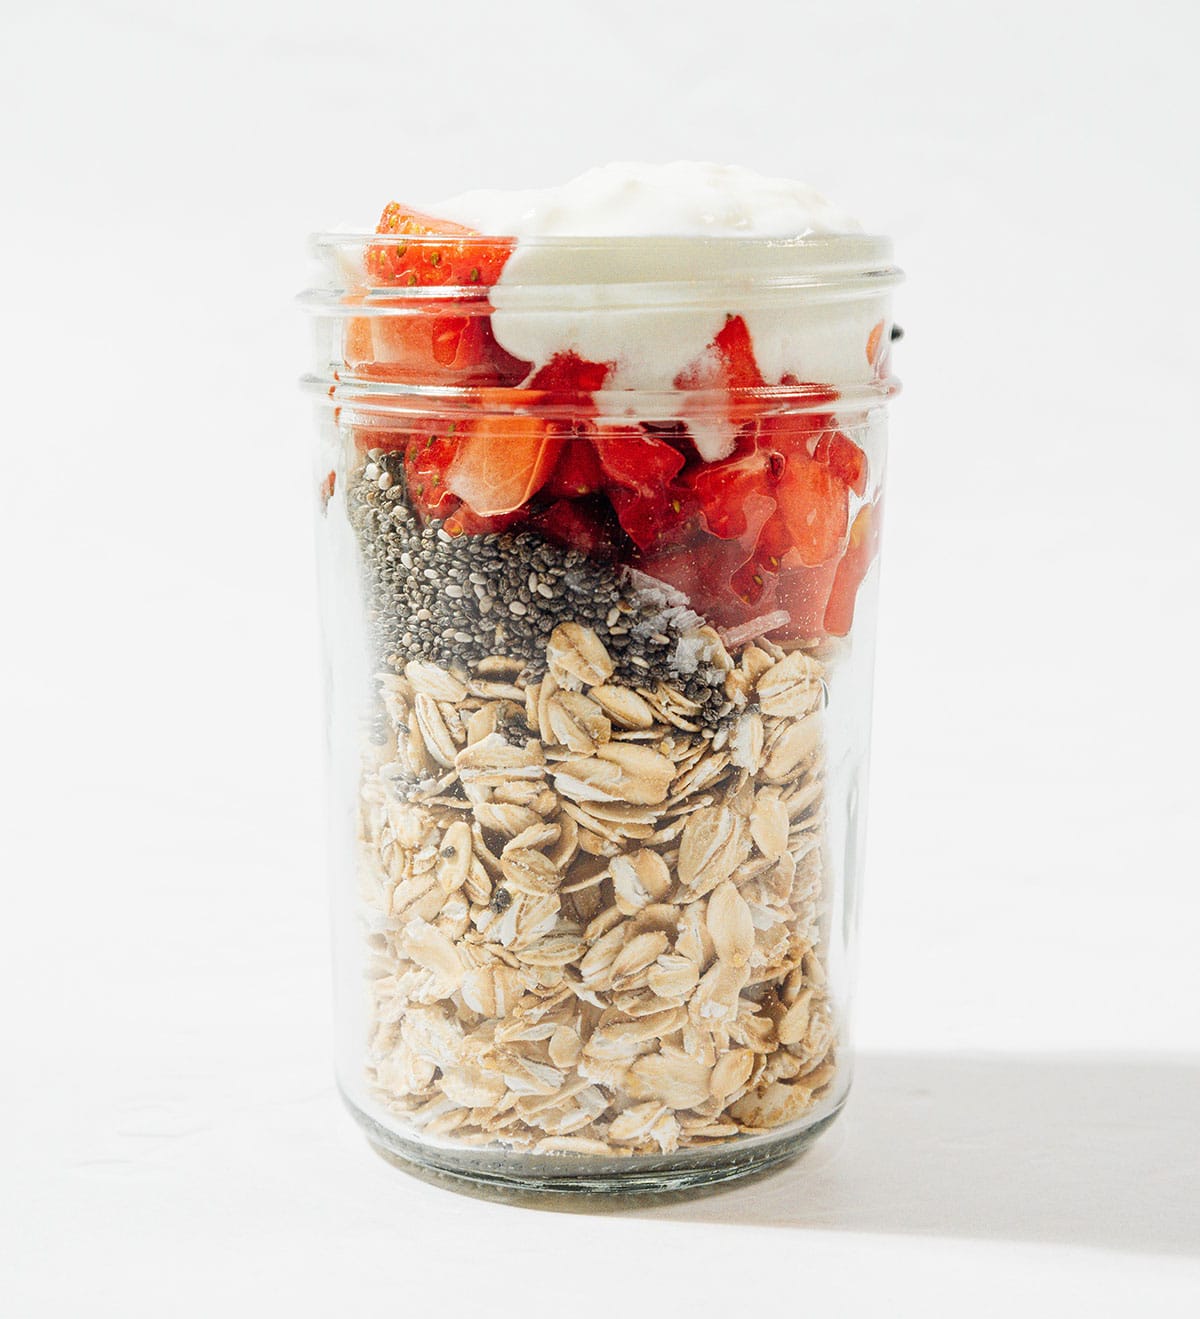 Ingredients for strawberry overnight oats in a jar.